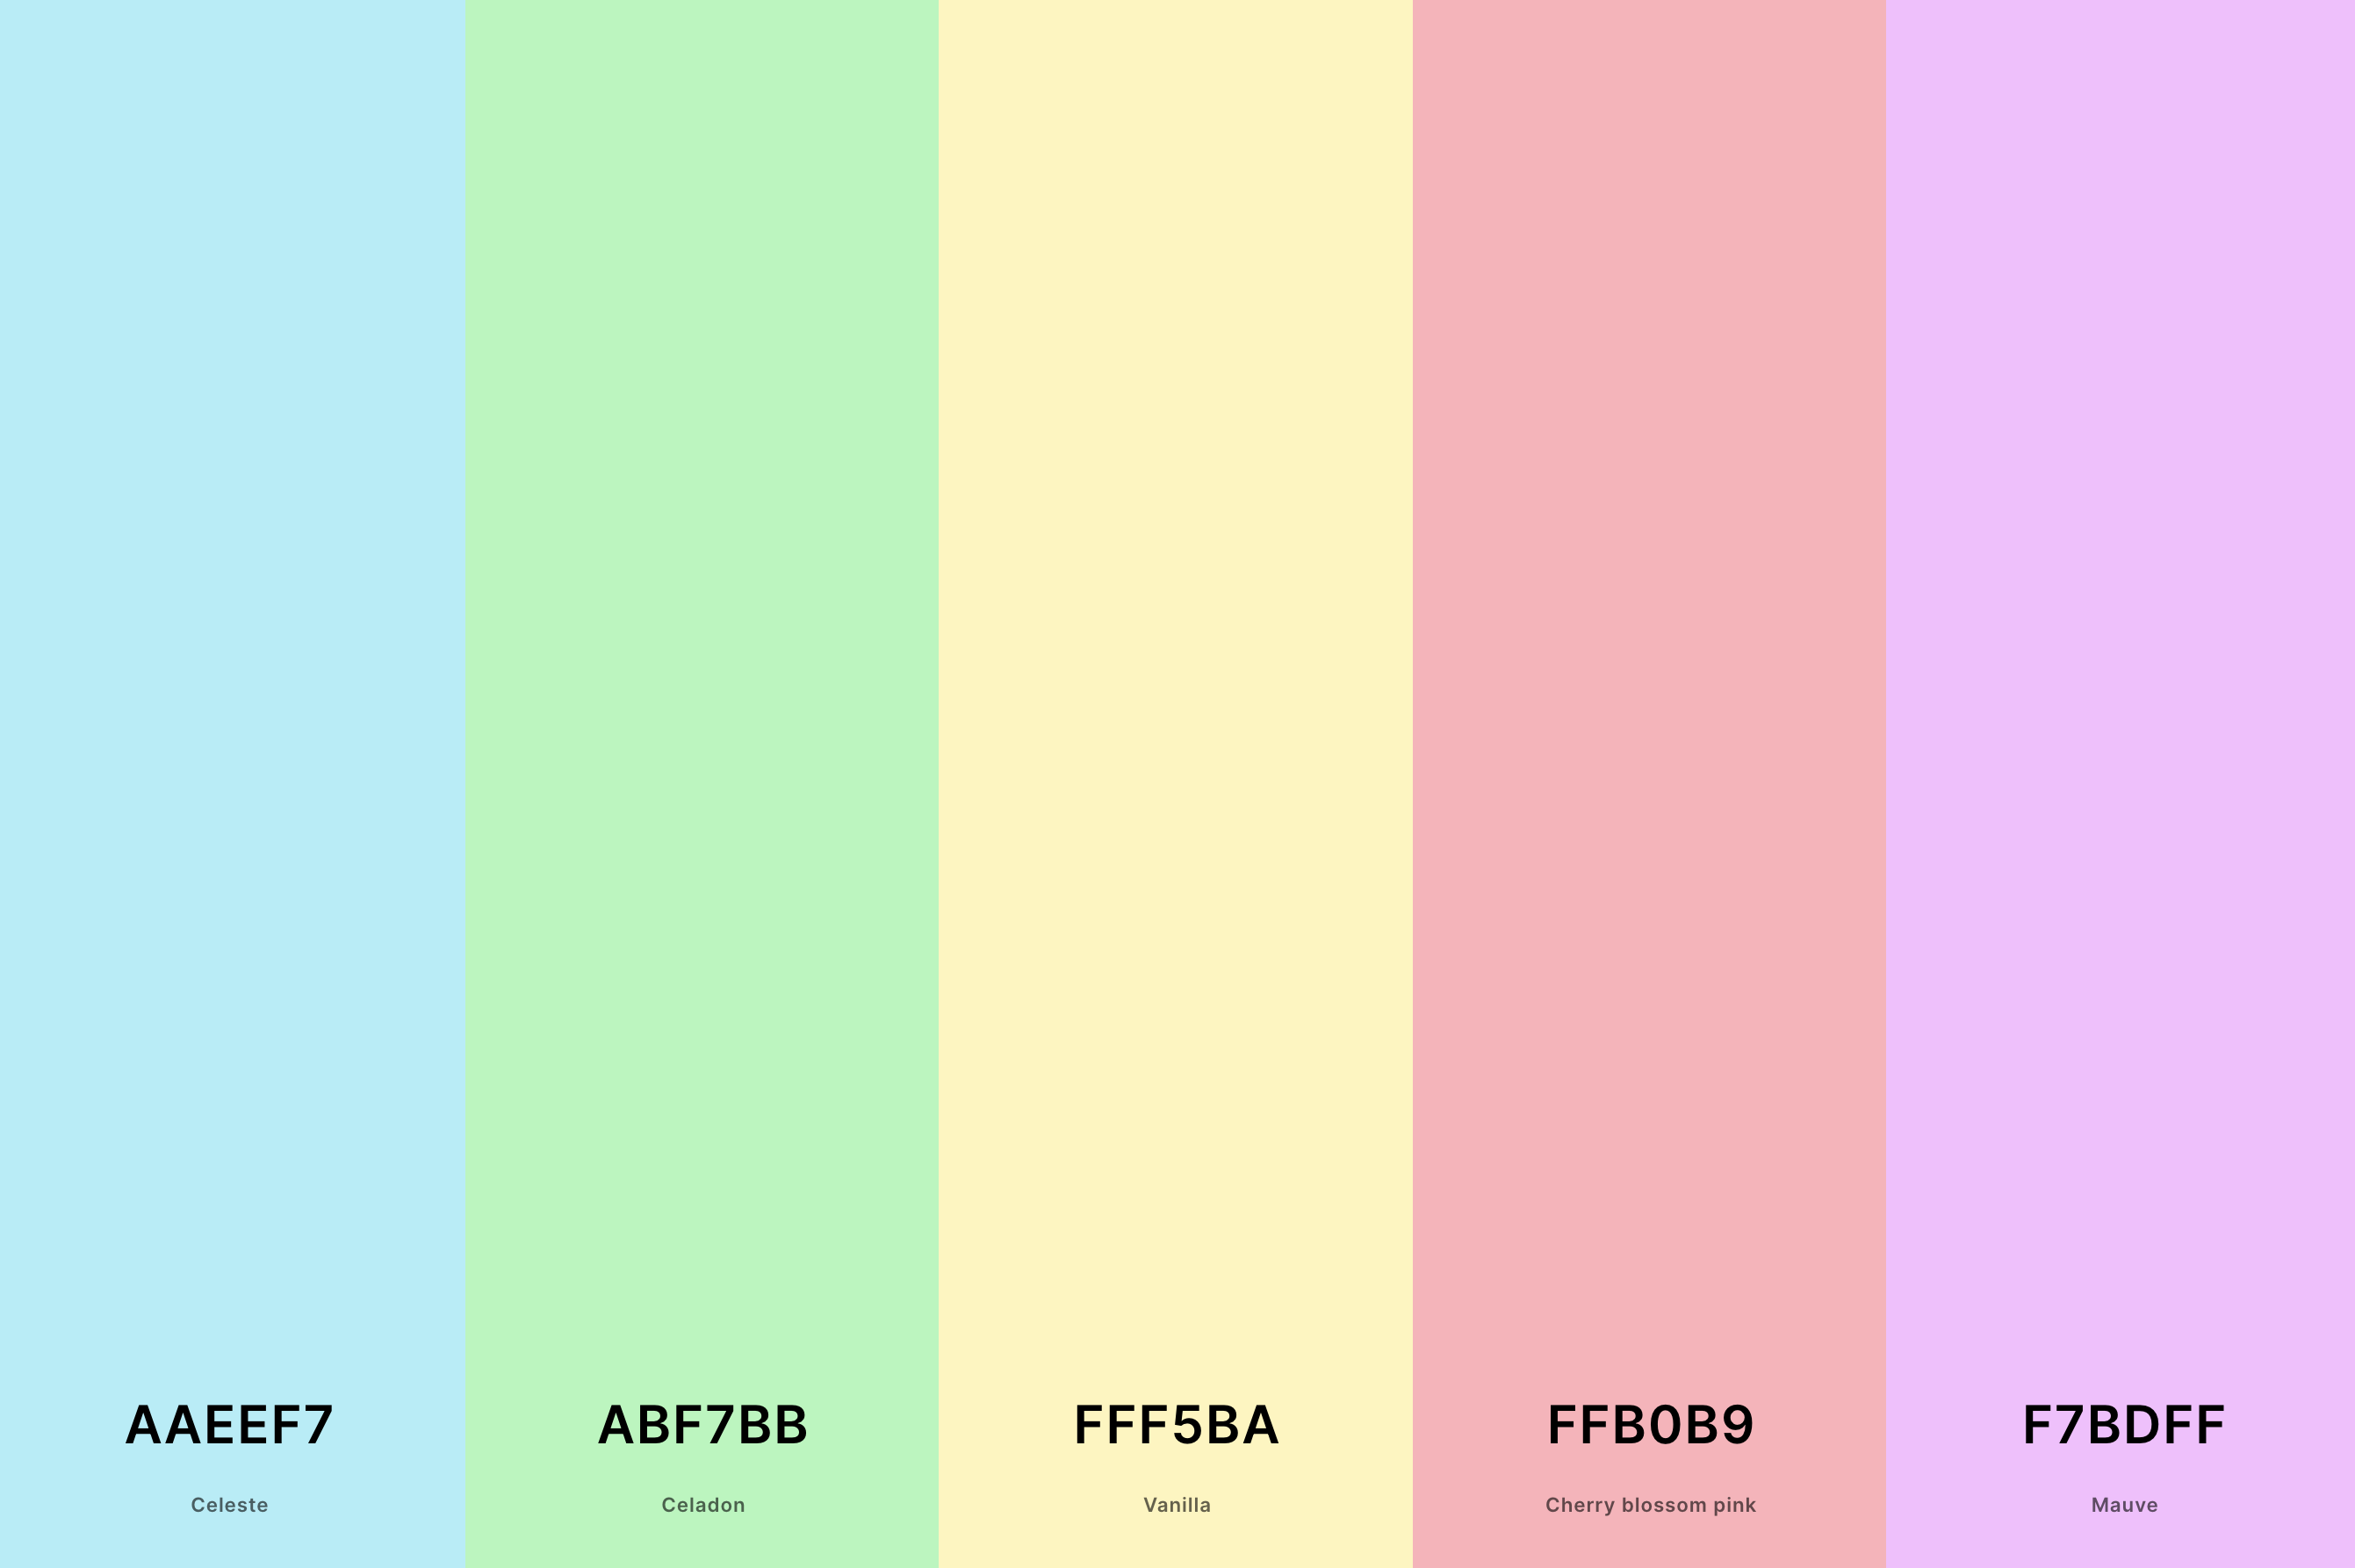 1. Ice Cream Color Palette Color Palette with Celeste (Hex #AAEEF7) + Celadon (Hex #ABF7BB) + Vanilla (Hex #FFF5BA) + Cherry Blossom Pink (Hex #FFB0B9) + Mauve (Hex #F7BDFF) Color Palette with Hex Codes